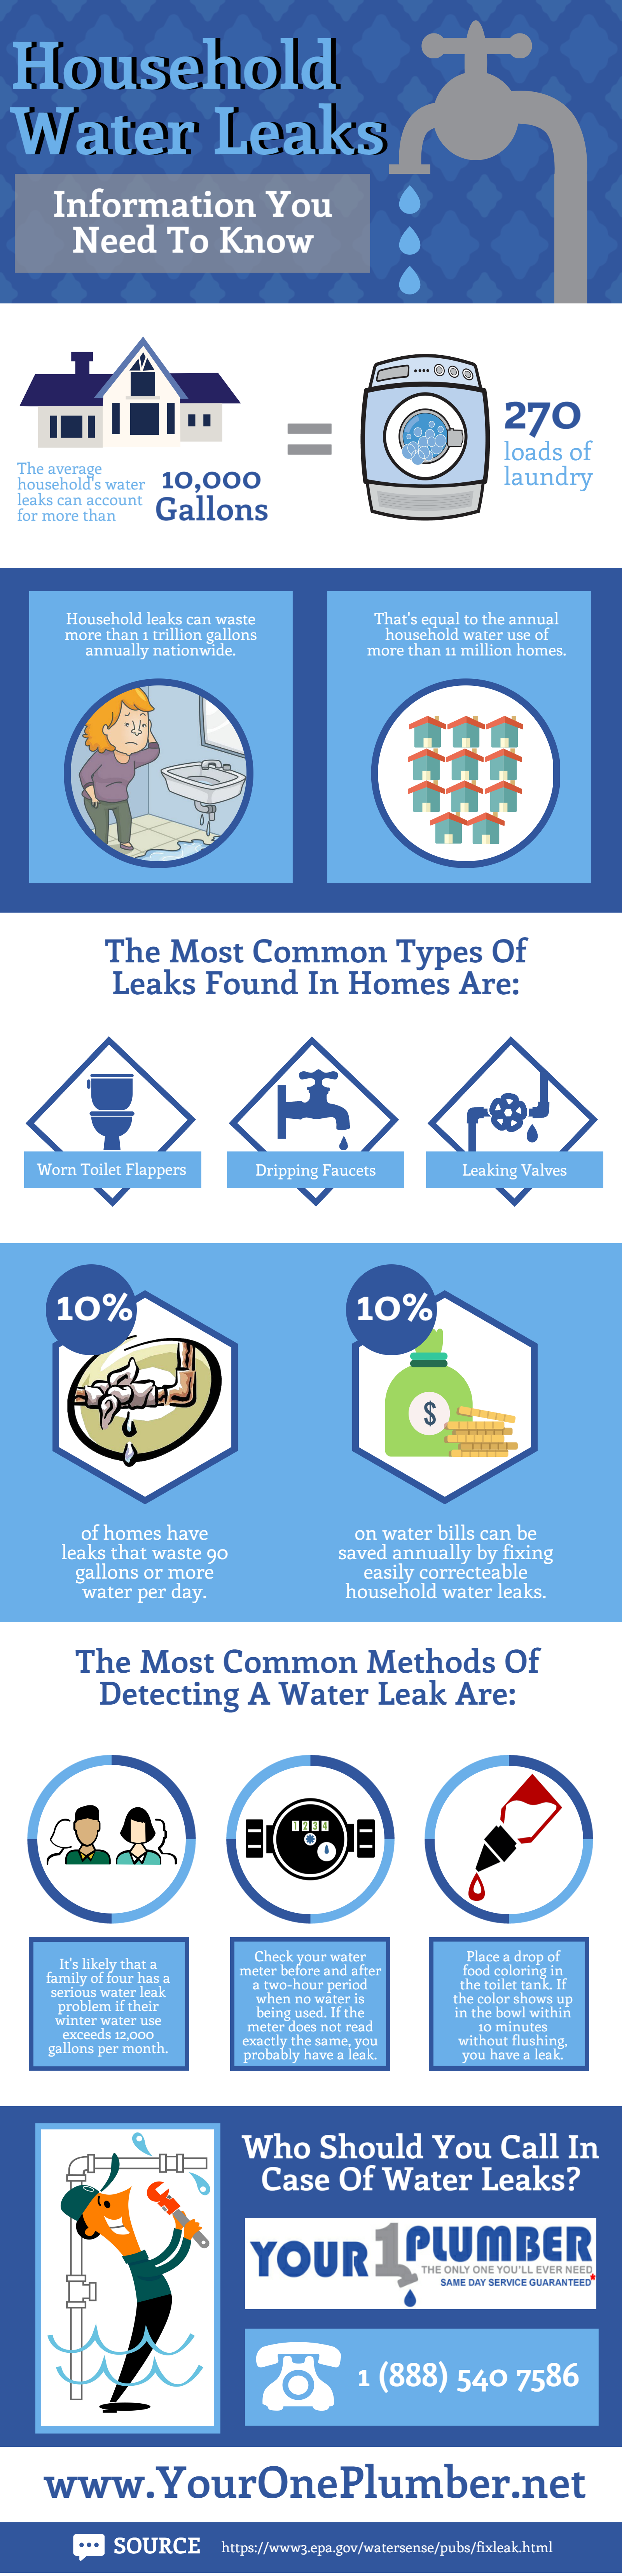 Household Water Leaks –Information You Need To Know